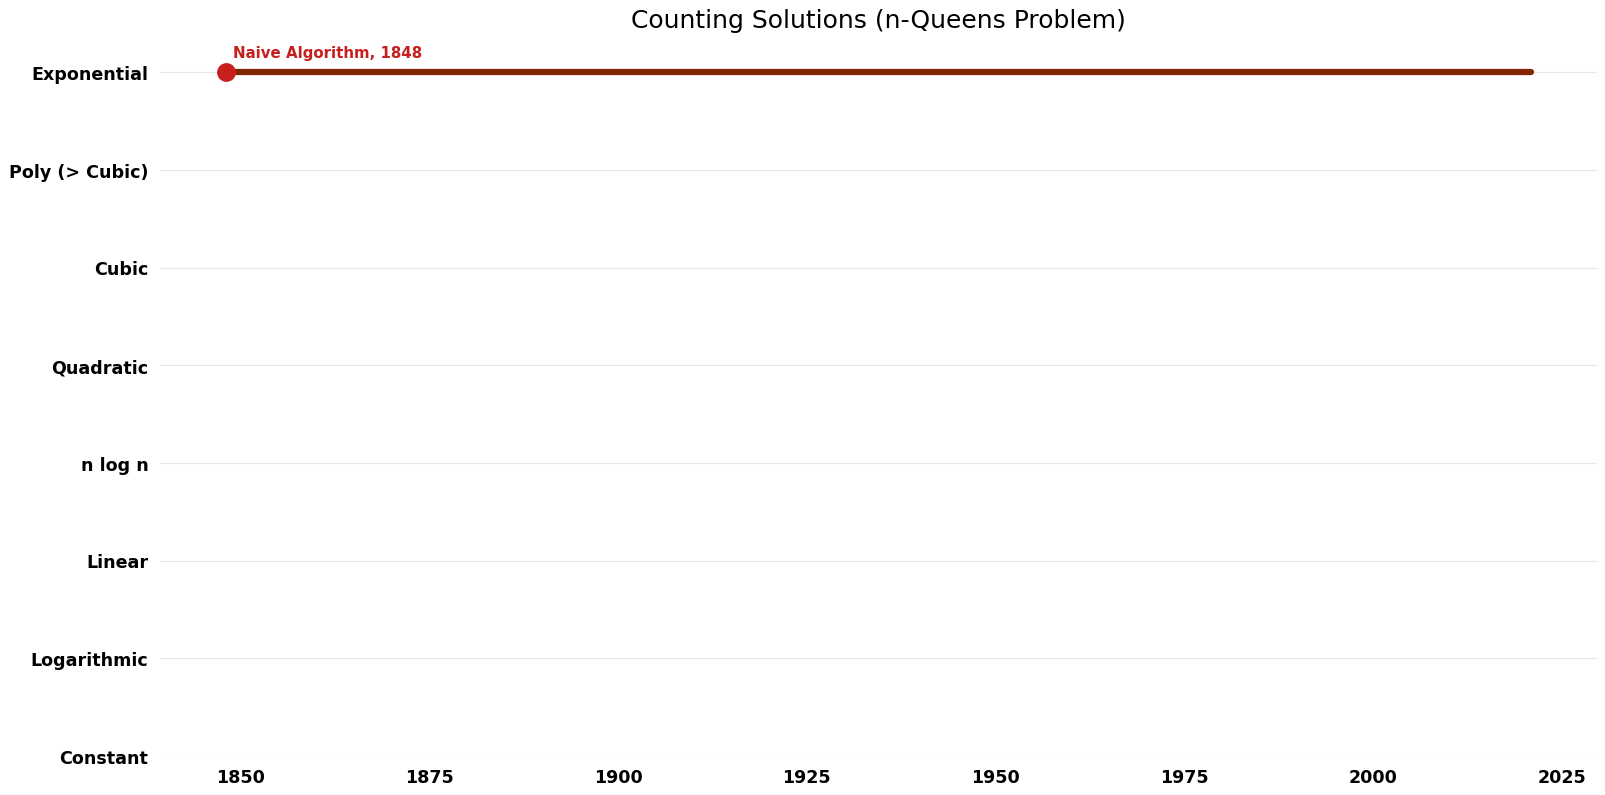 N-Queens Problem - Counting Solutions - Time.png